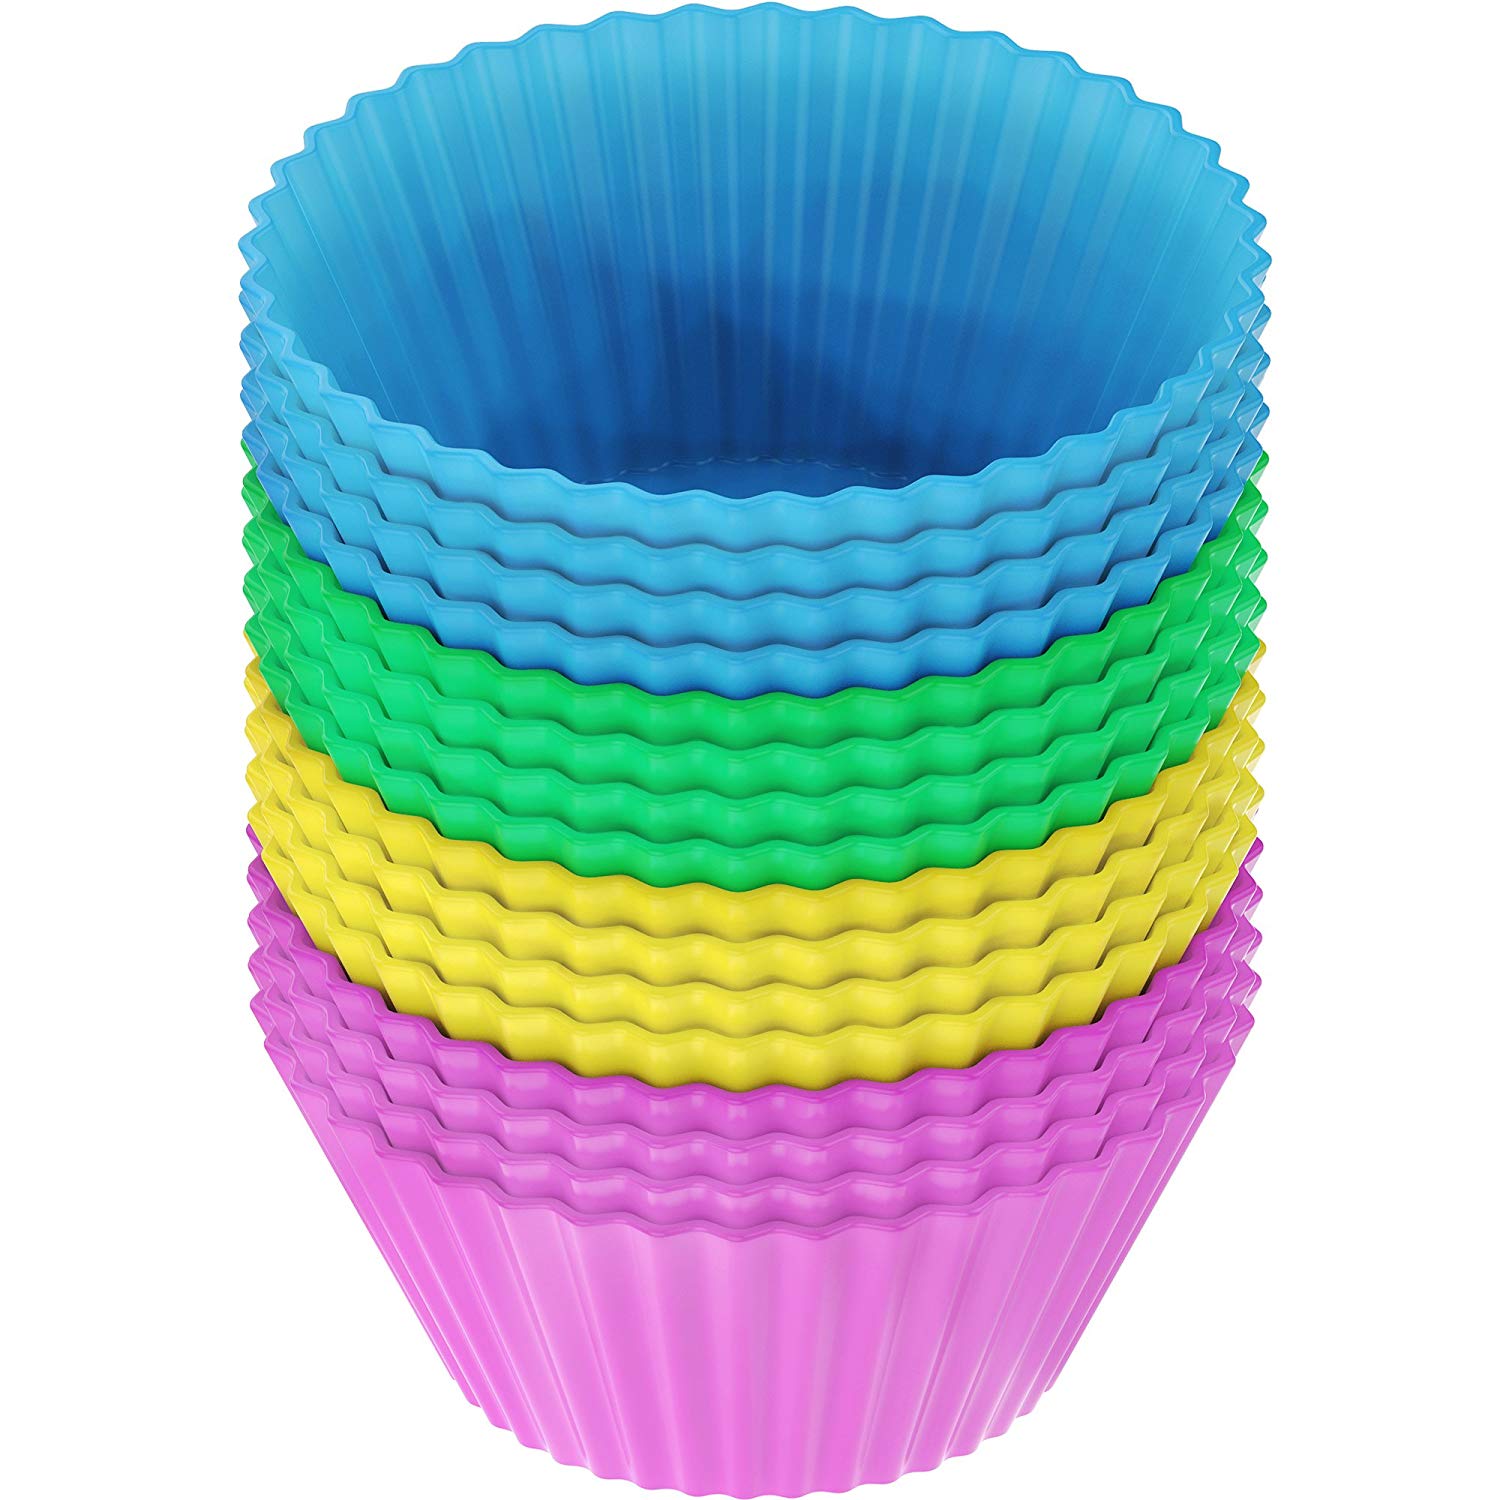 Vremi Silicone Cupcake Baking Cups, 24-Pack